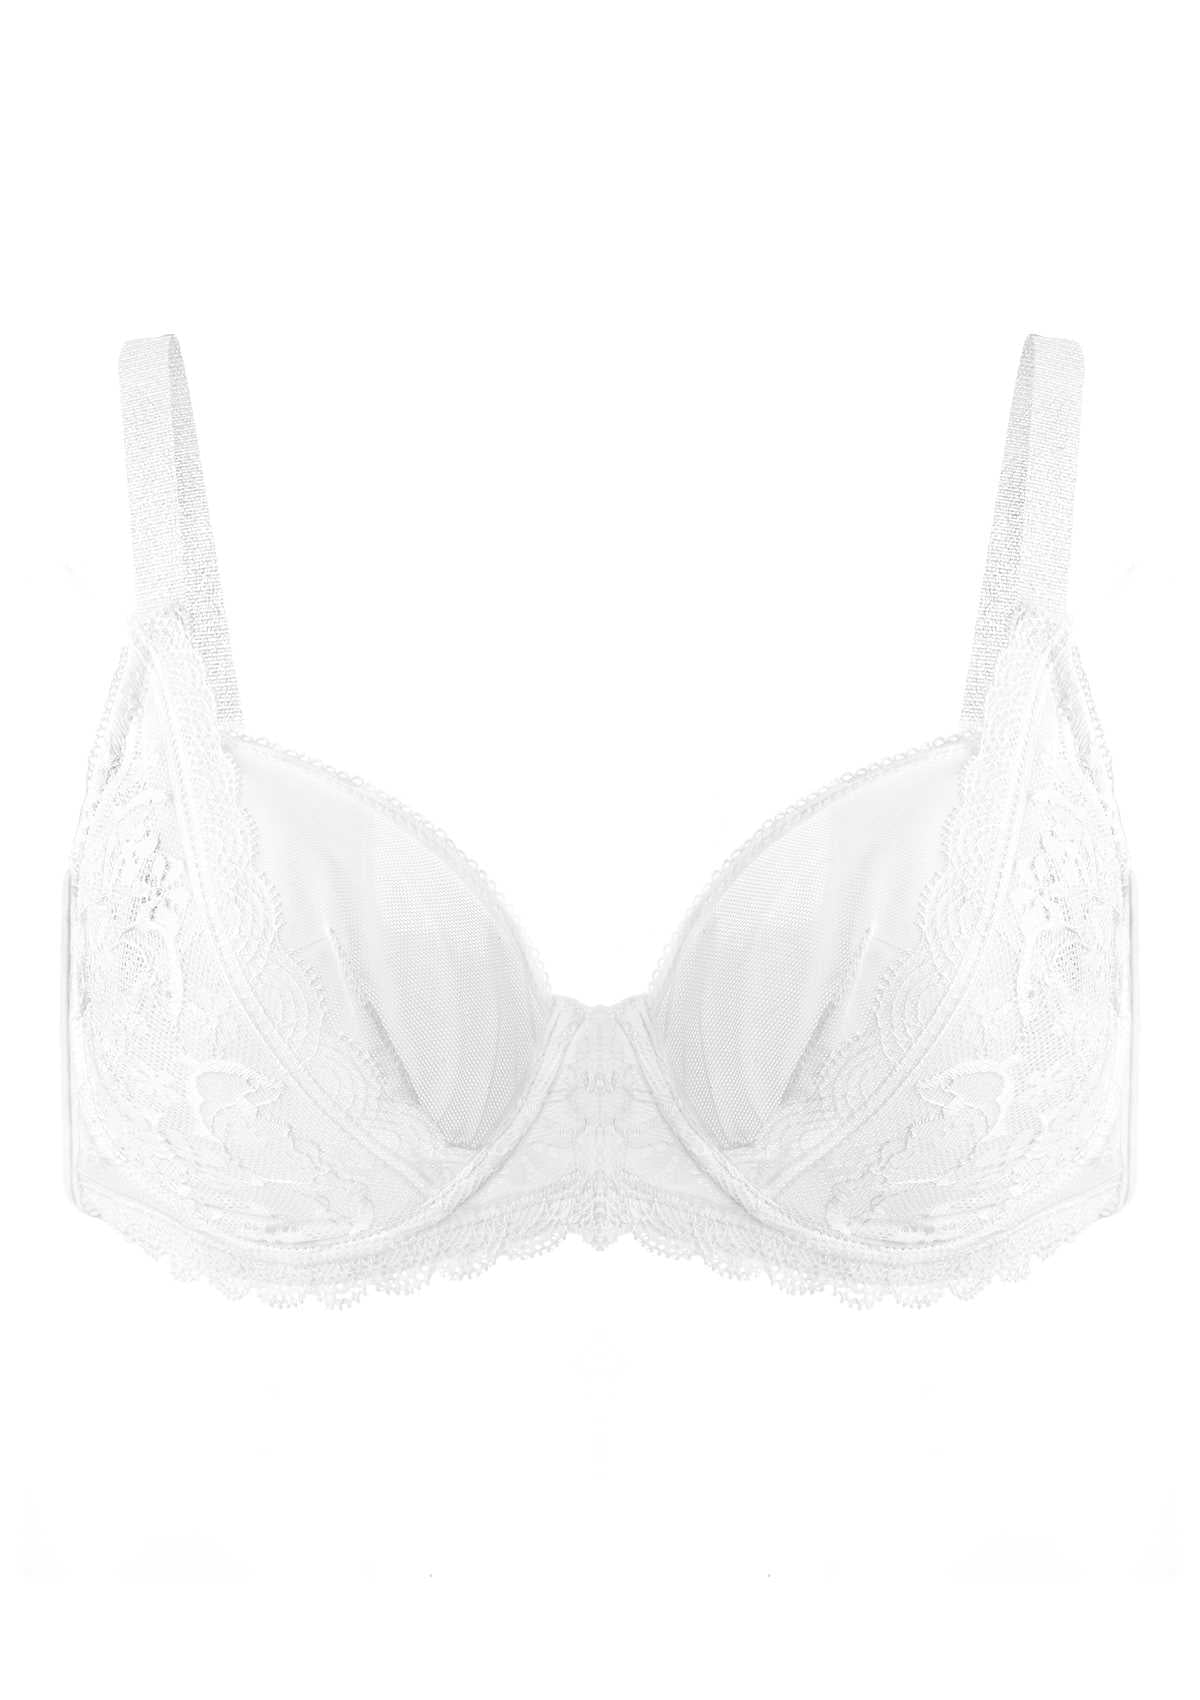 HSIA Anemone Big Bra: Best Bra For Lift And Support, Floral Bra - Burgundy / 42 / DD/E